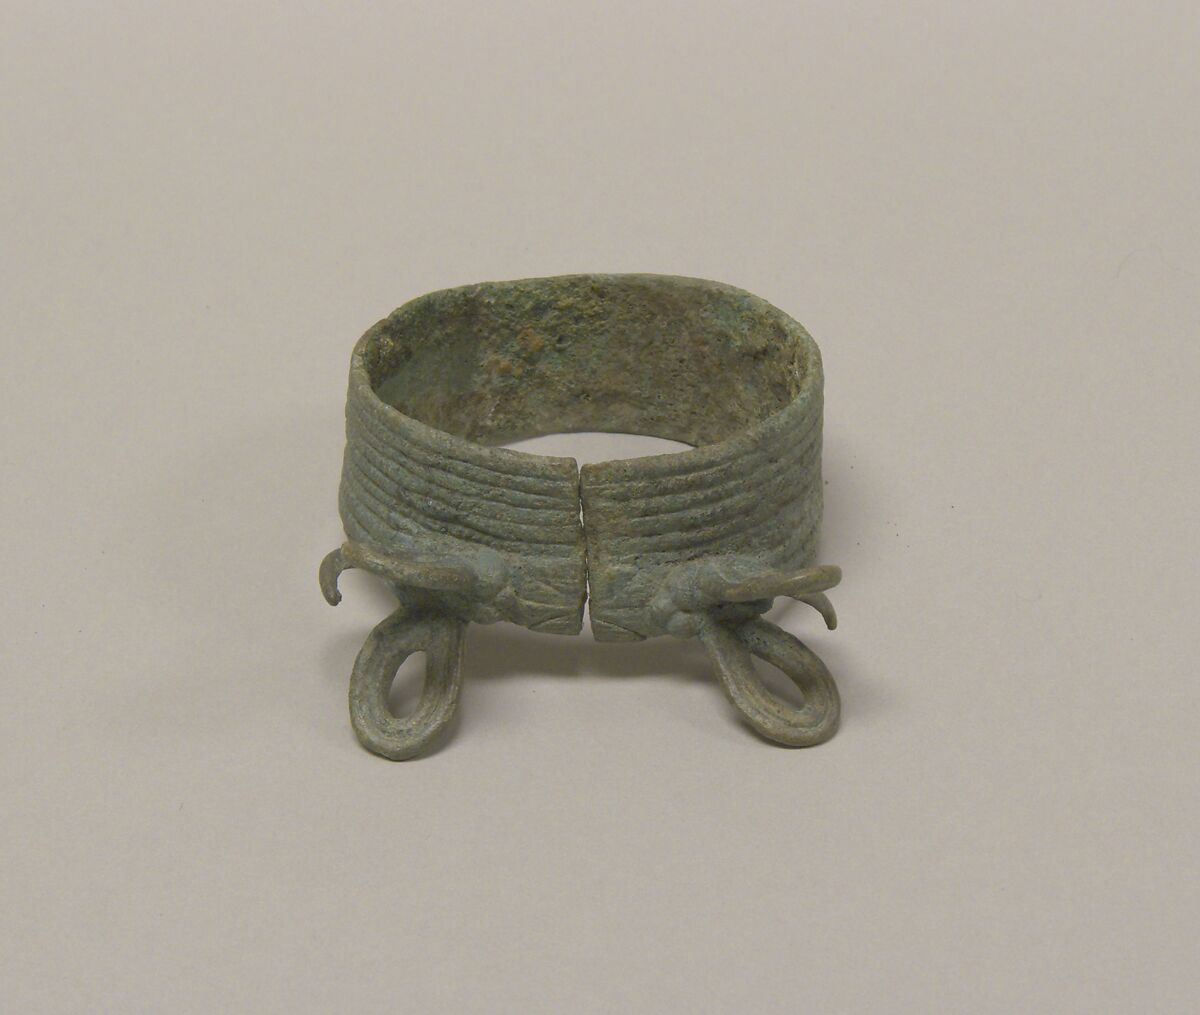 Bracelet with Two Facing Dragonflies, Bronze, Thailand 